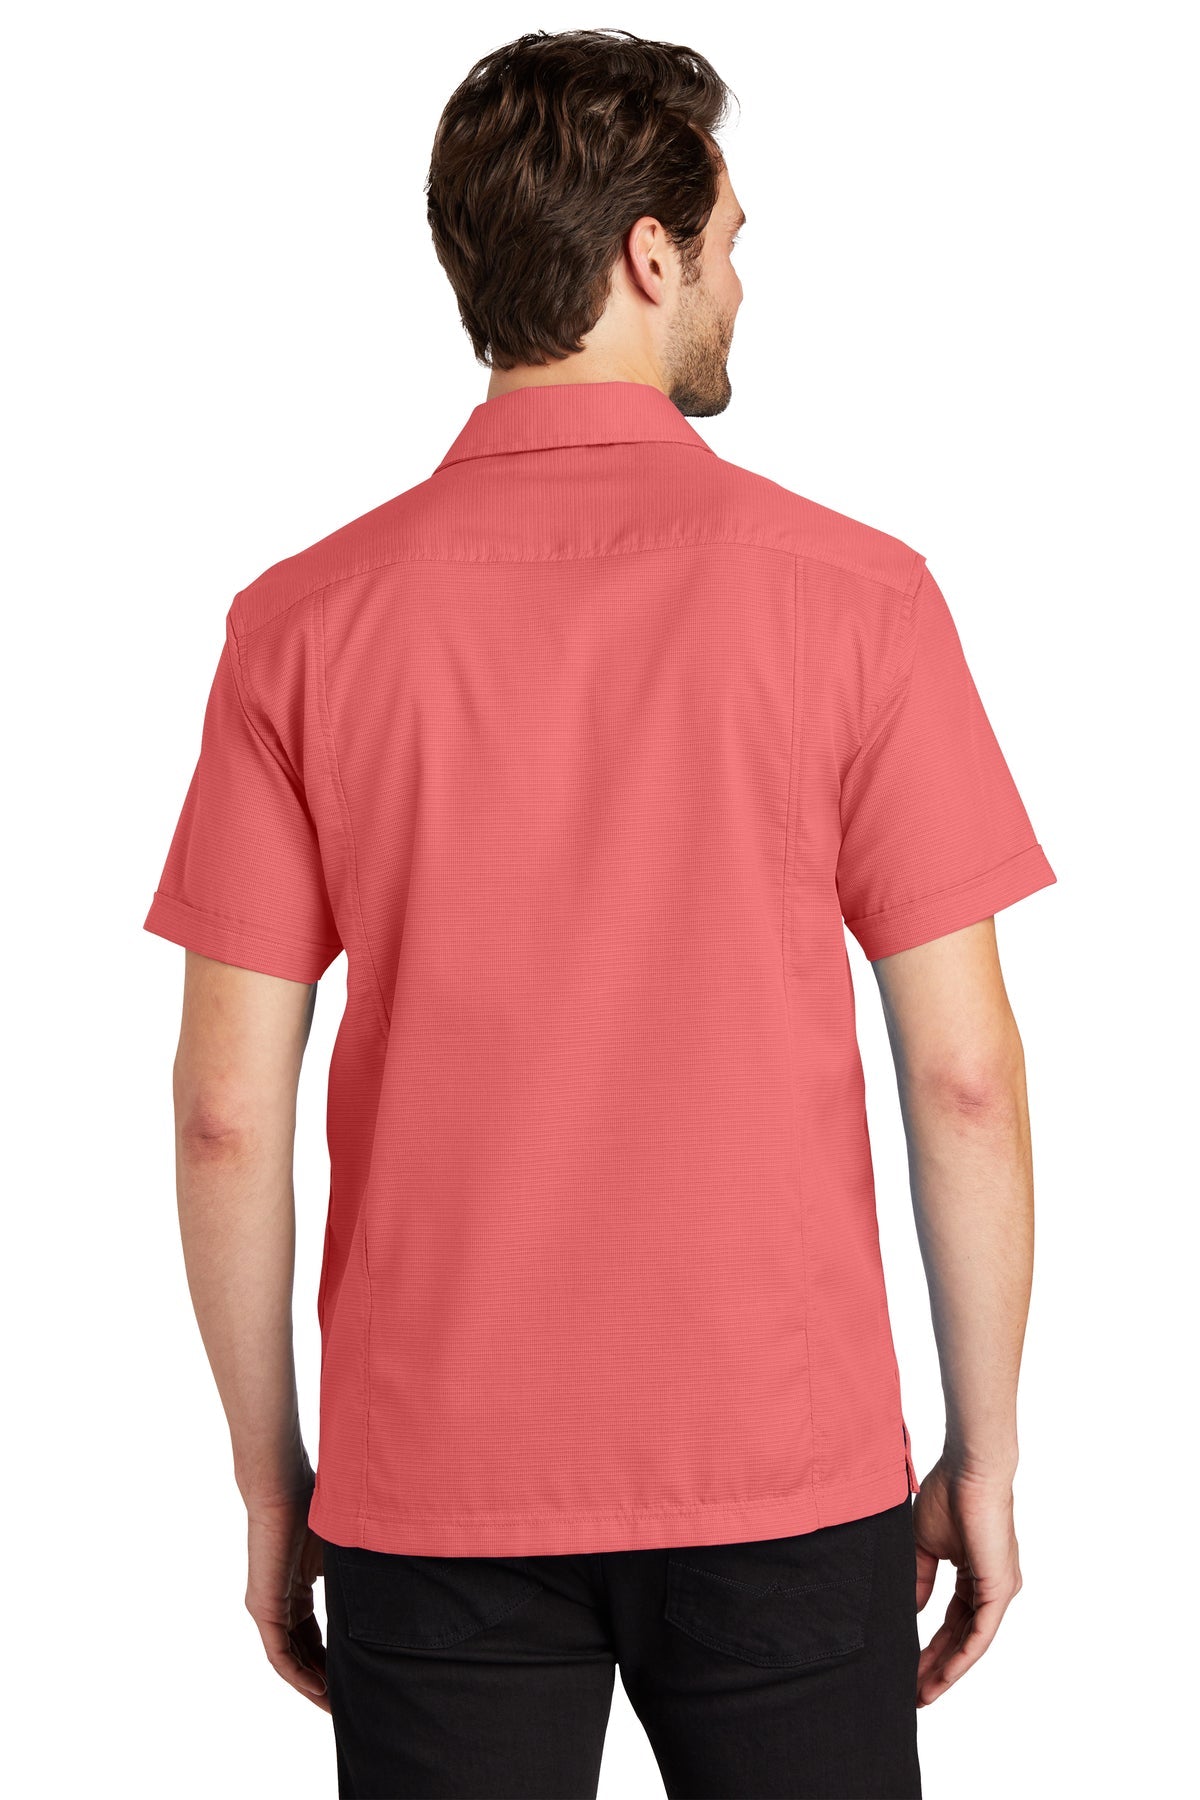 port authority_s662 _deep coral_company_logo_button downs